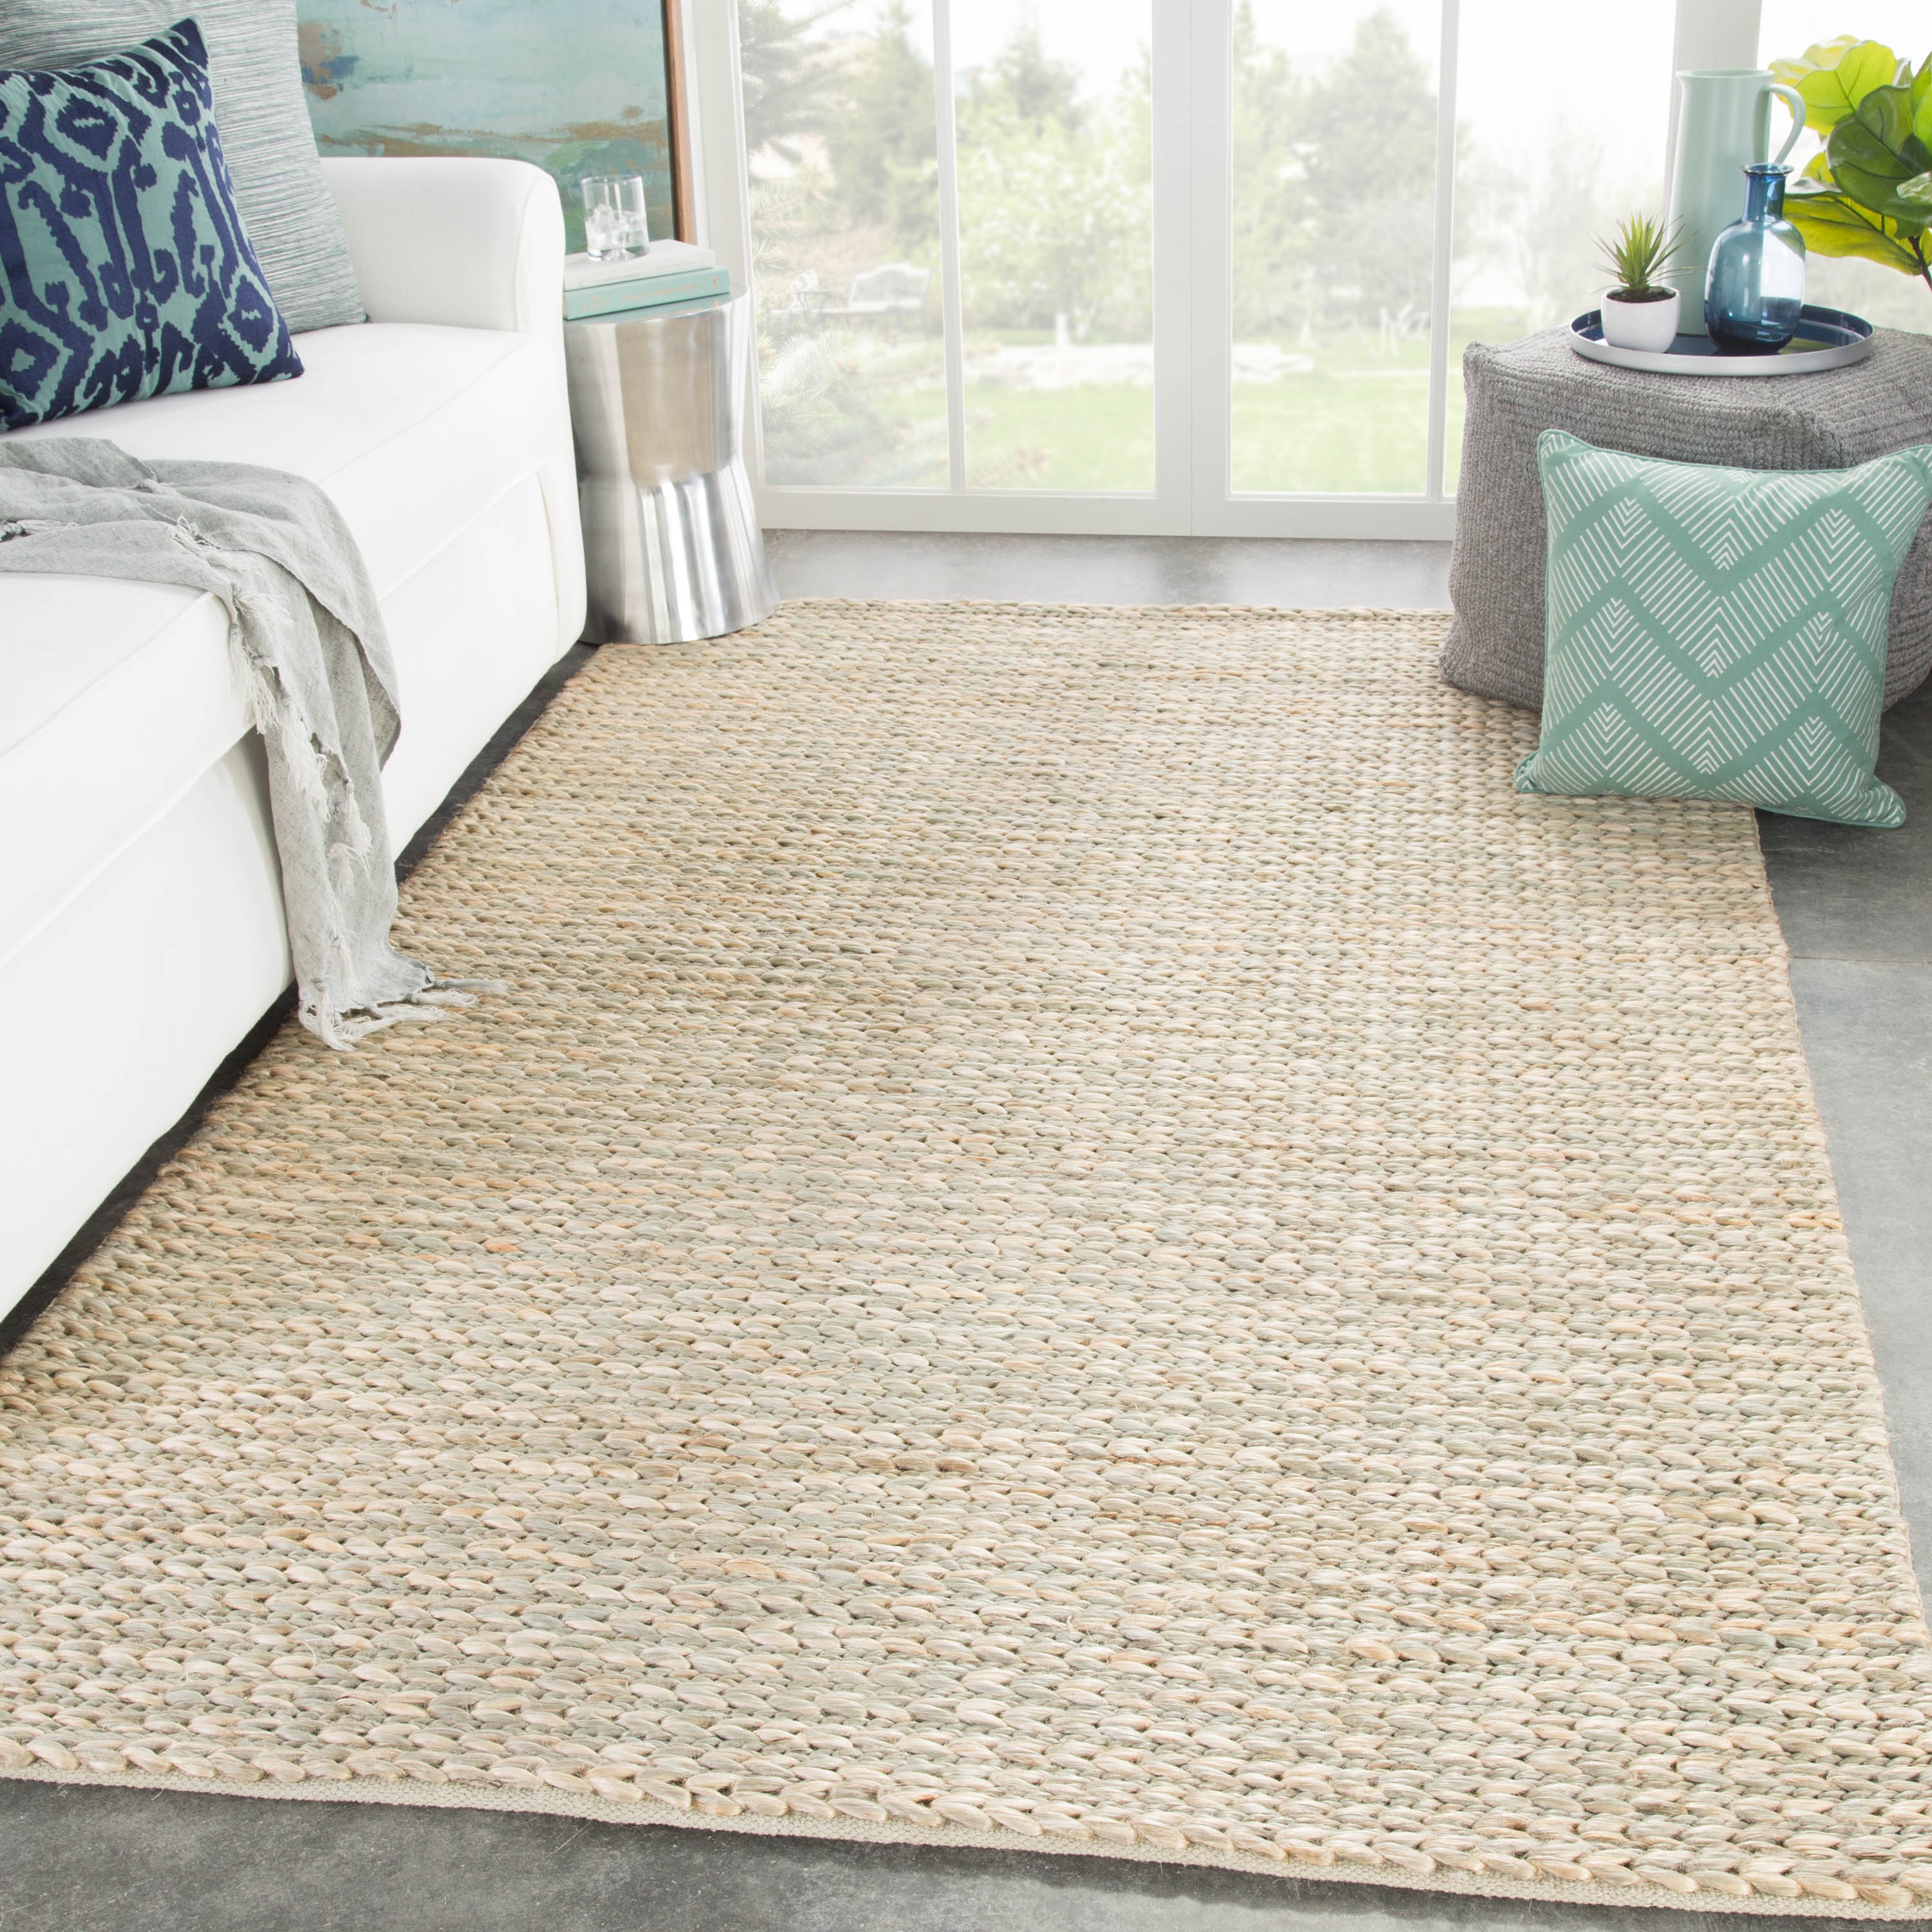 Calista Natural Solid Tan/ Greige Area Rug (9'X12') - Image 4